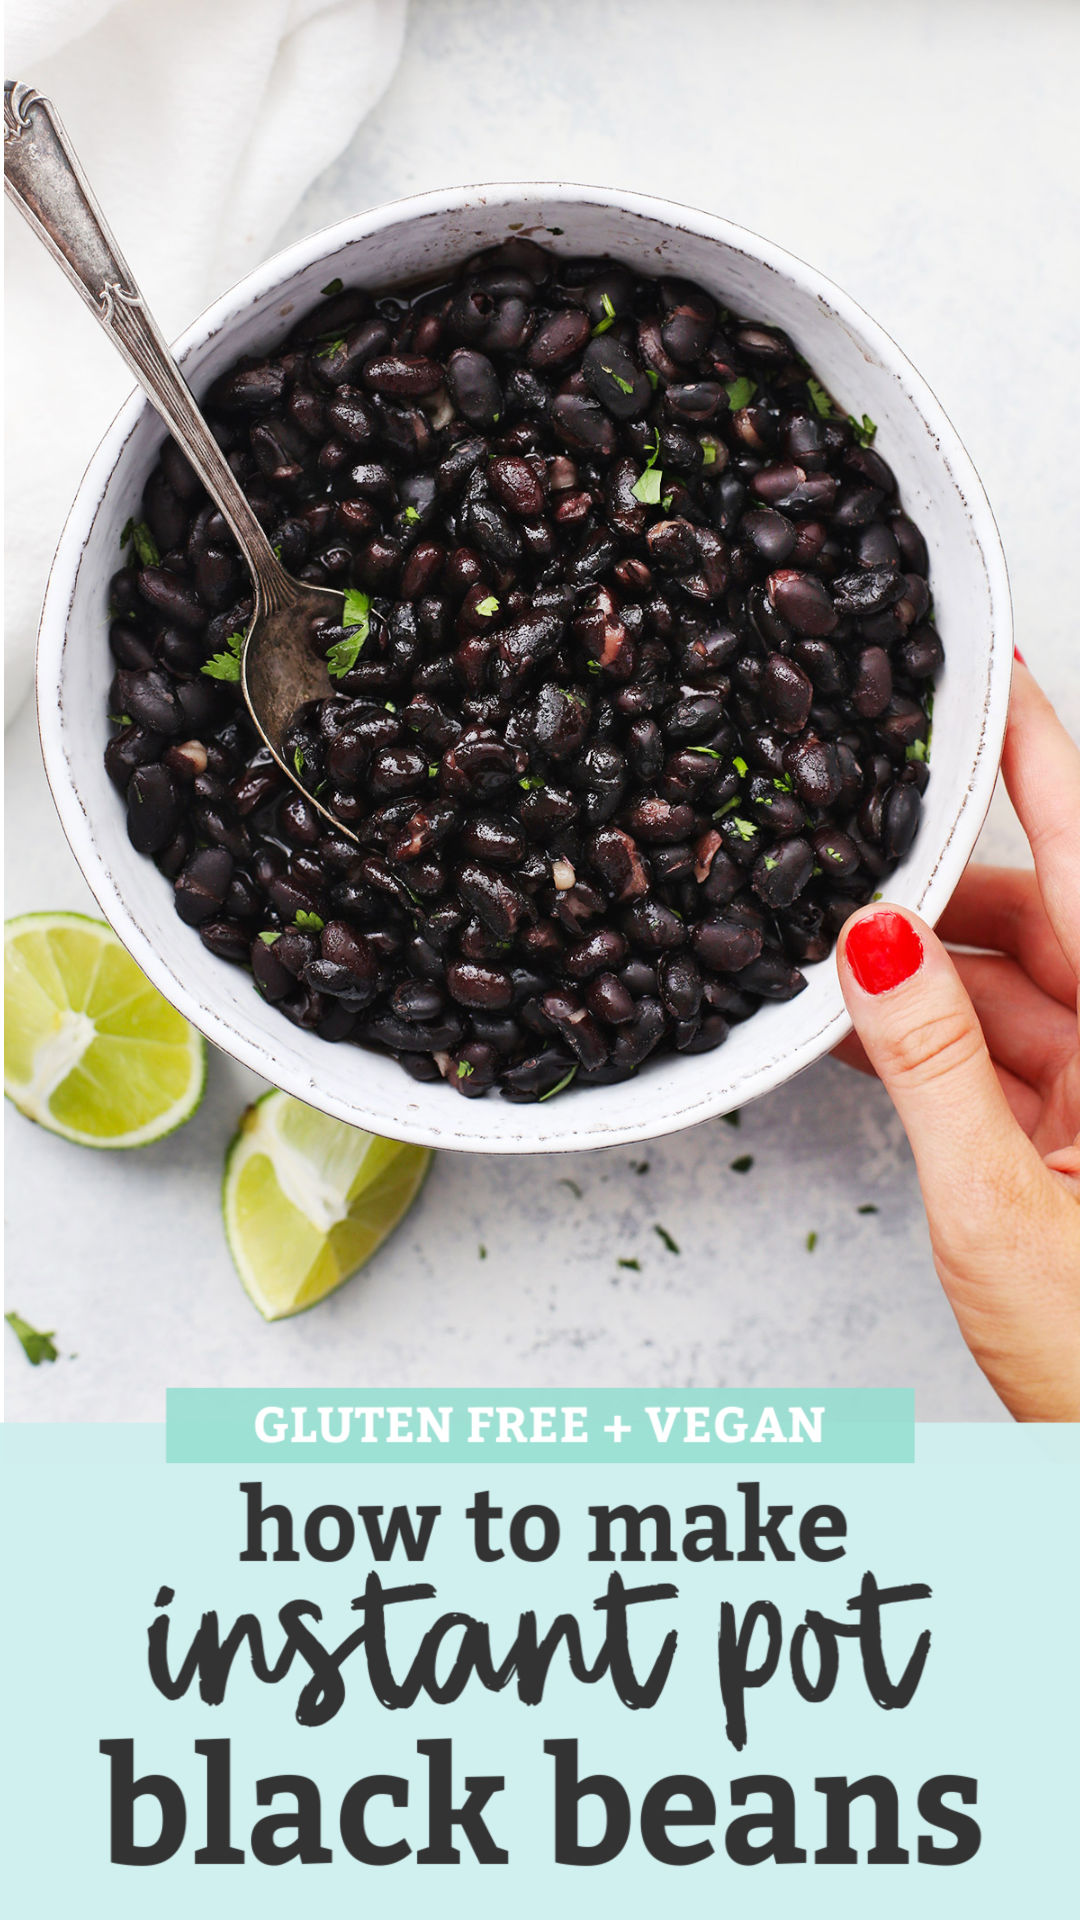 Instant Pot Black Beans Tutorial from One Lovely Life